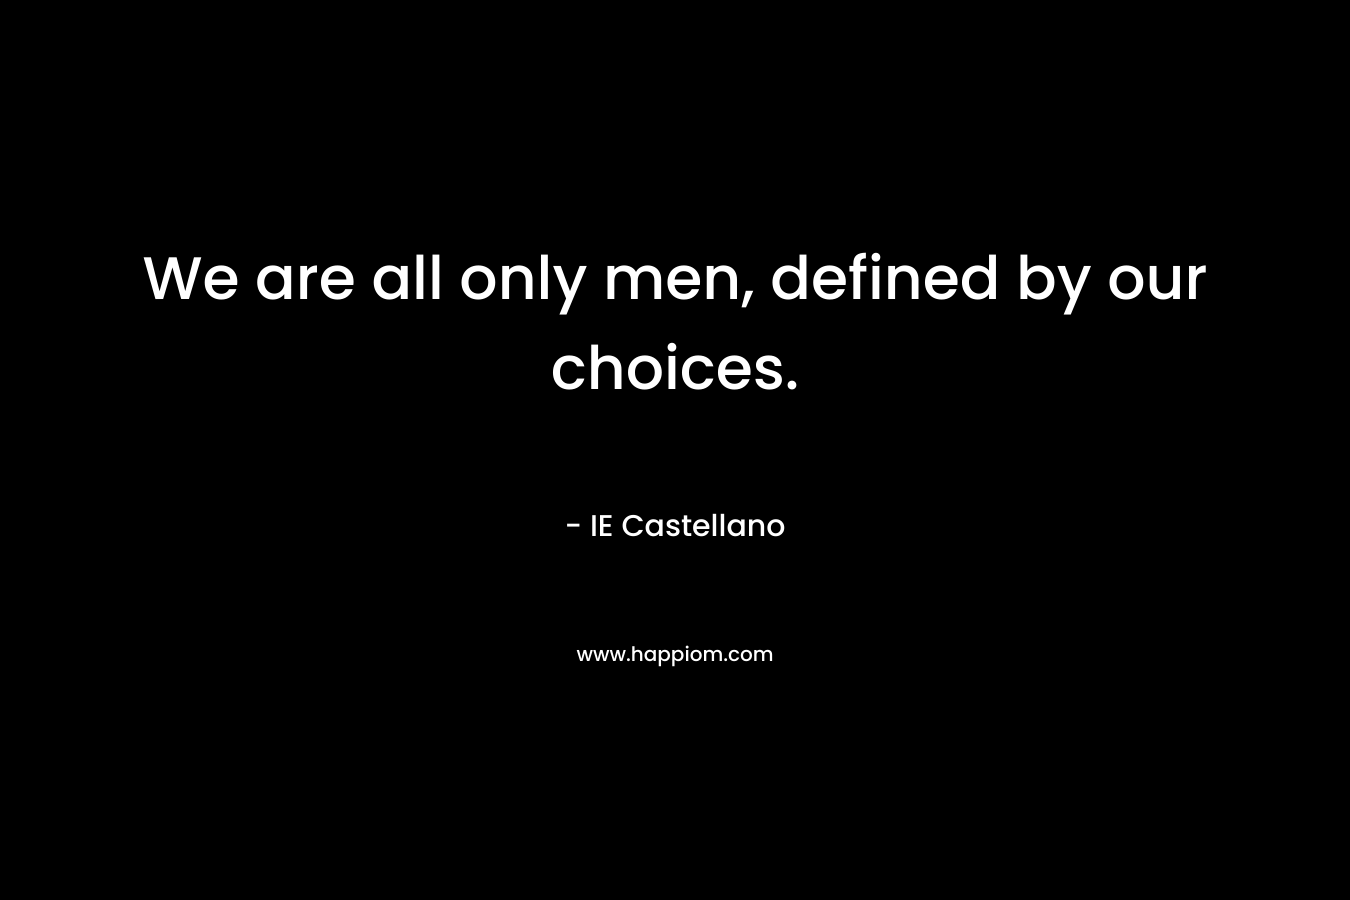 We are all only men, defined by our choices.